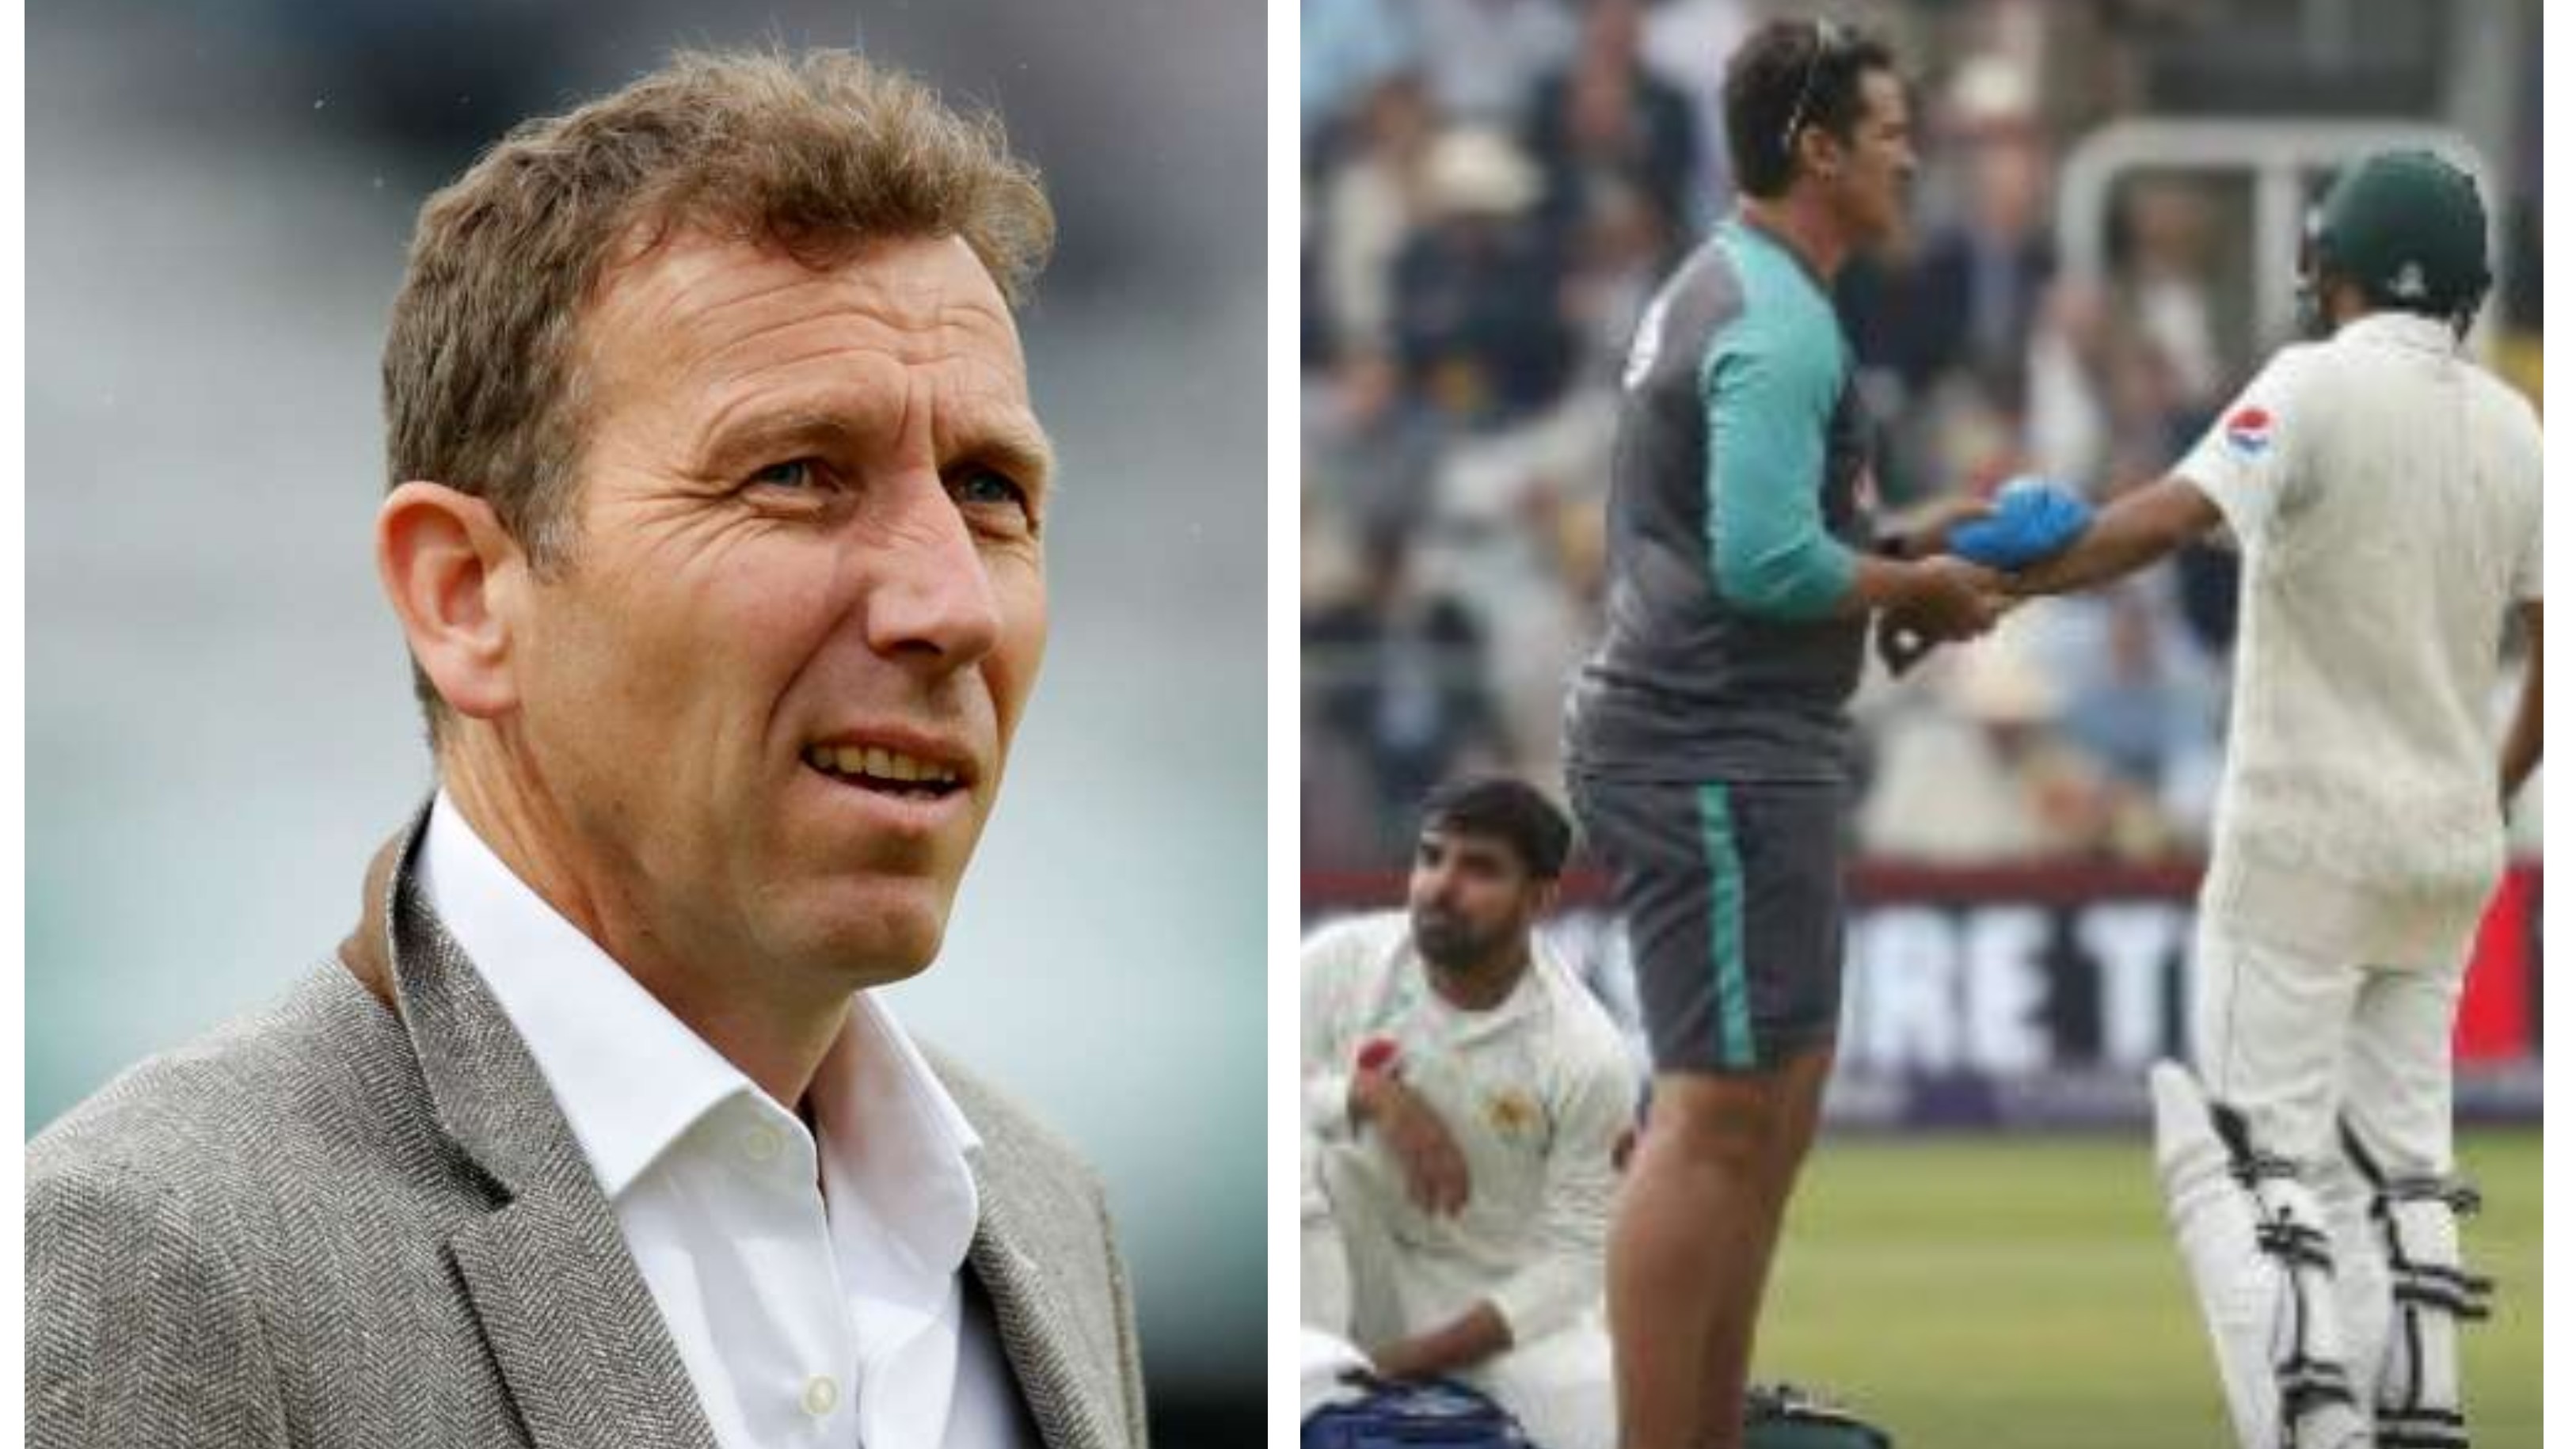 Michael Atherton bats for introduction of injury substitutes amid COVID-19 pandemic 